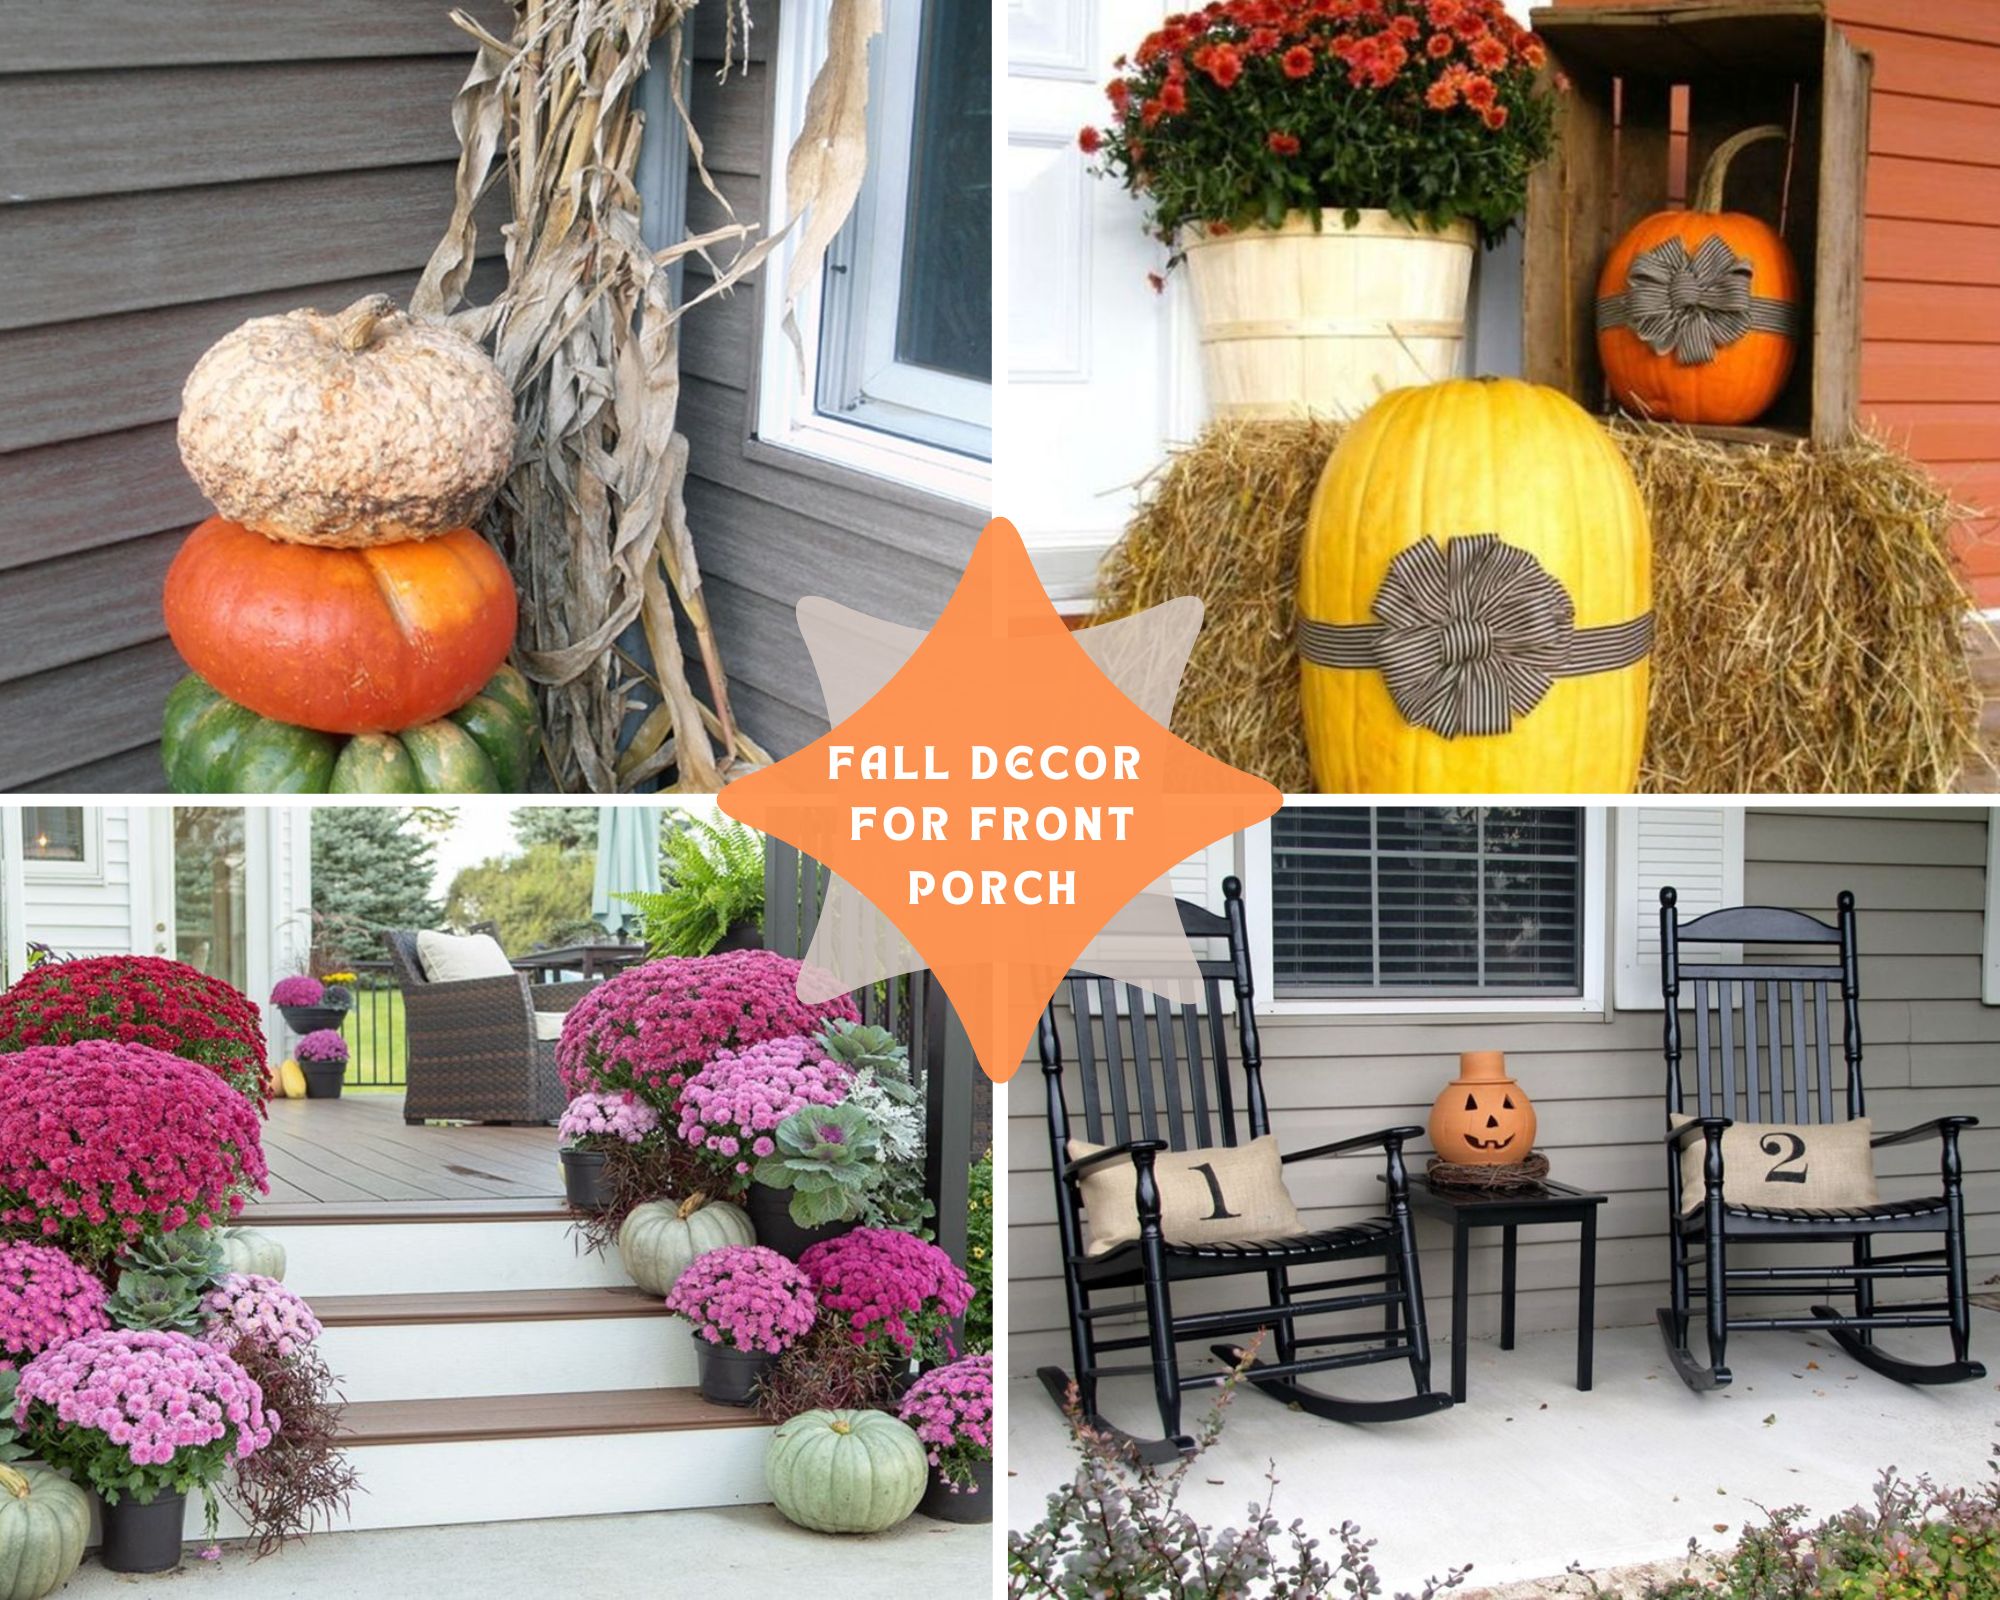 Fall Decor for Front Porch